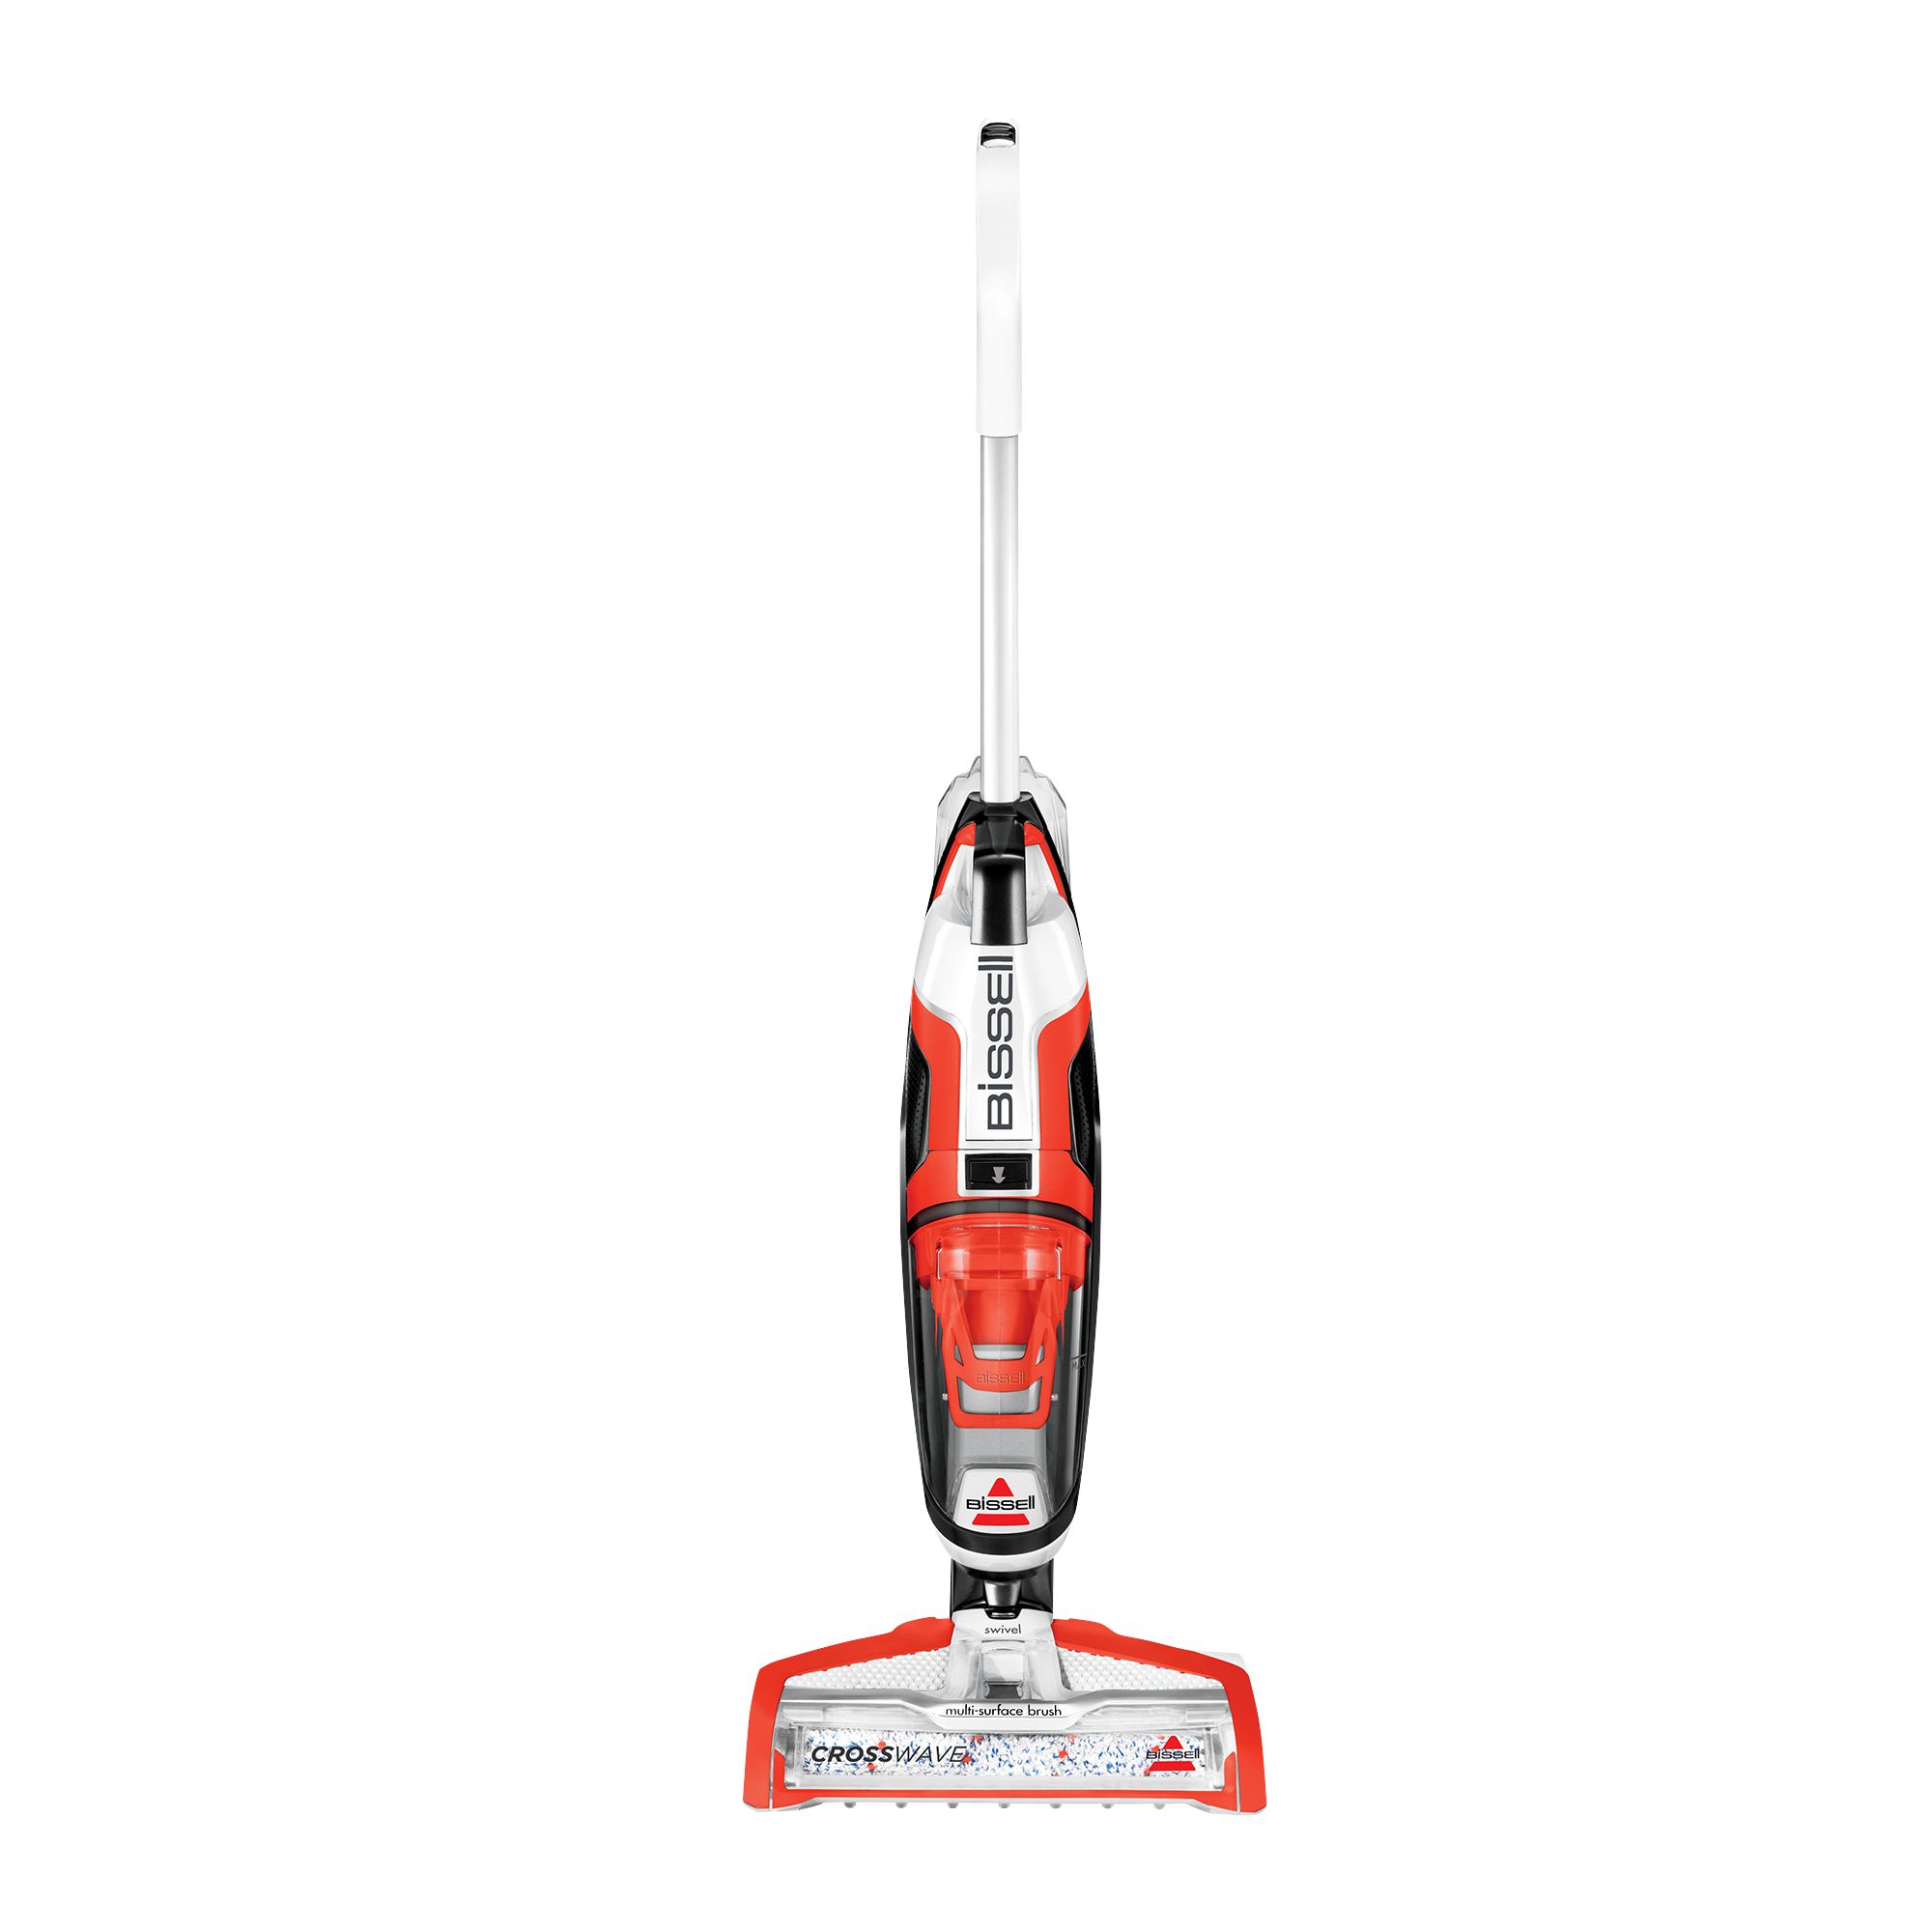 This Bissell Wet-Dry Vacuum Is on Sale at